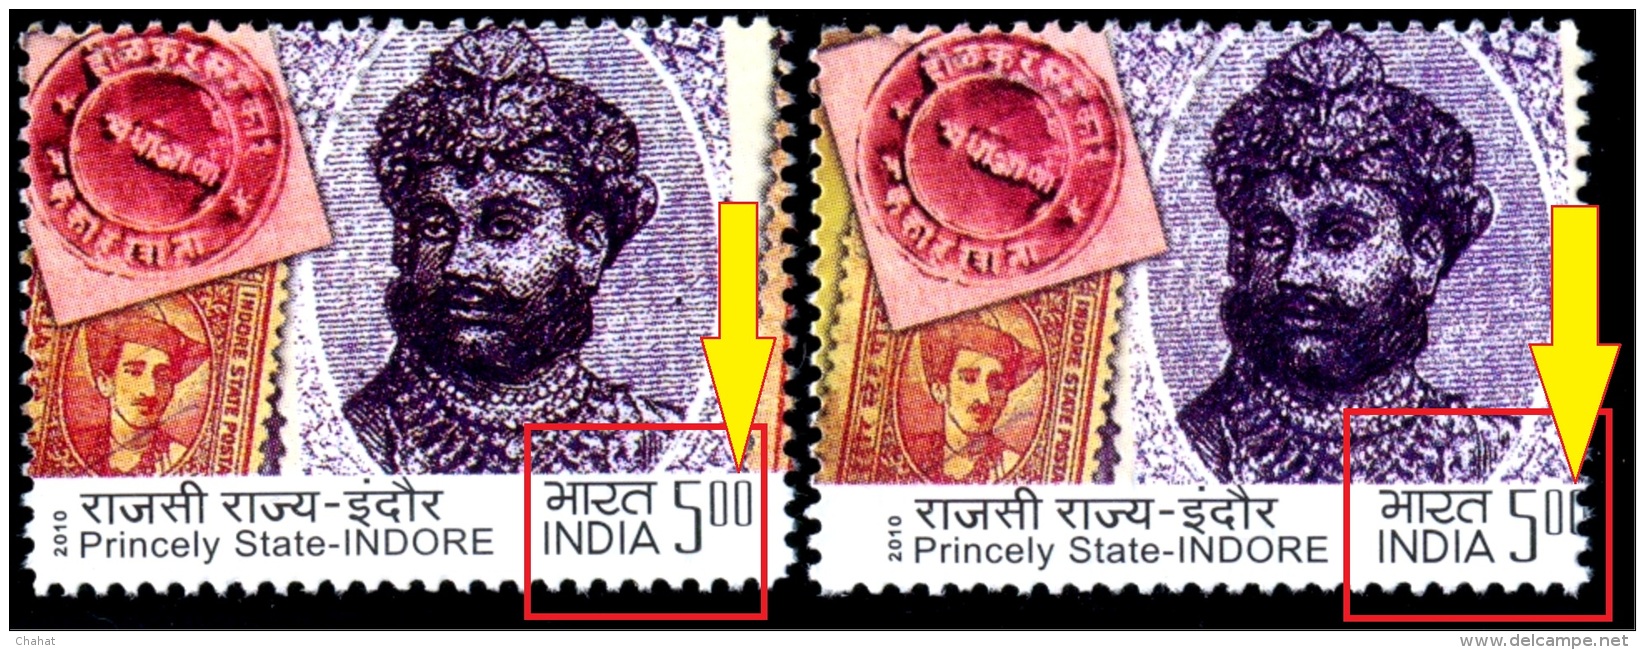 STAMPS ON STAMPS-PRINCELY STATES OF INDIA-INDORE STATE-MASSIVE ERROR-MNH-B9-806 - Errors, Freaks & Oddities (EFO)